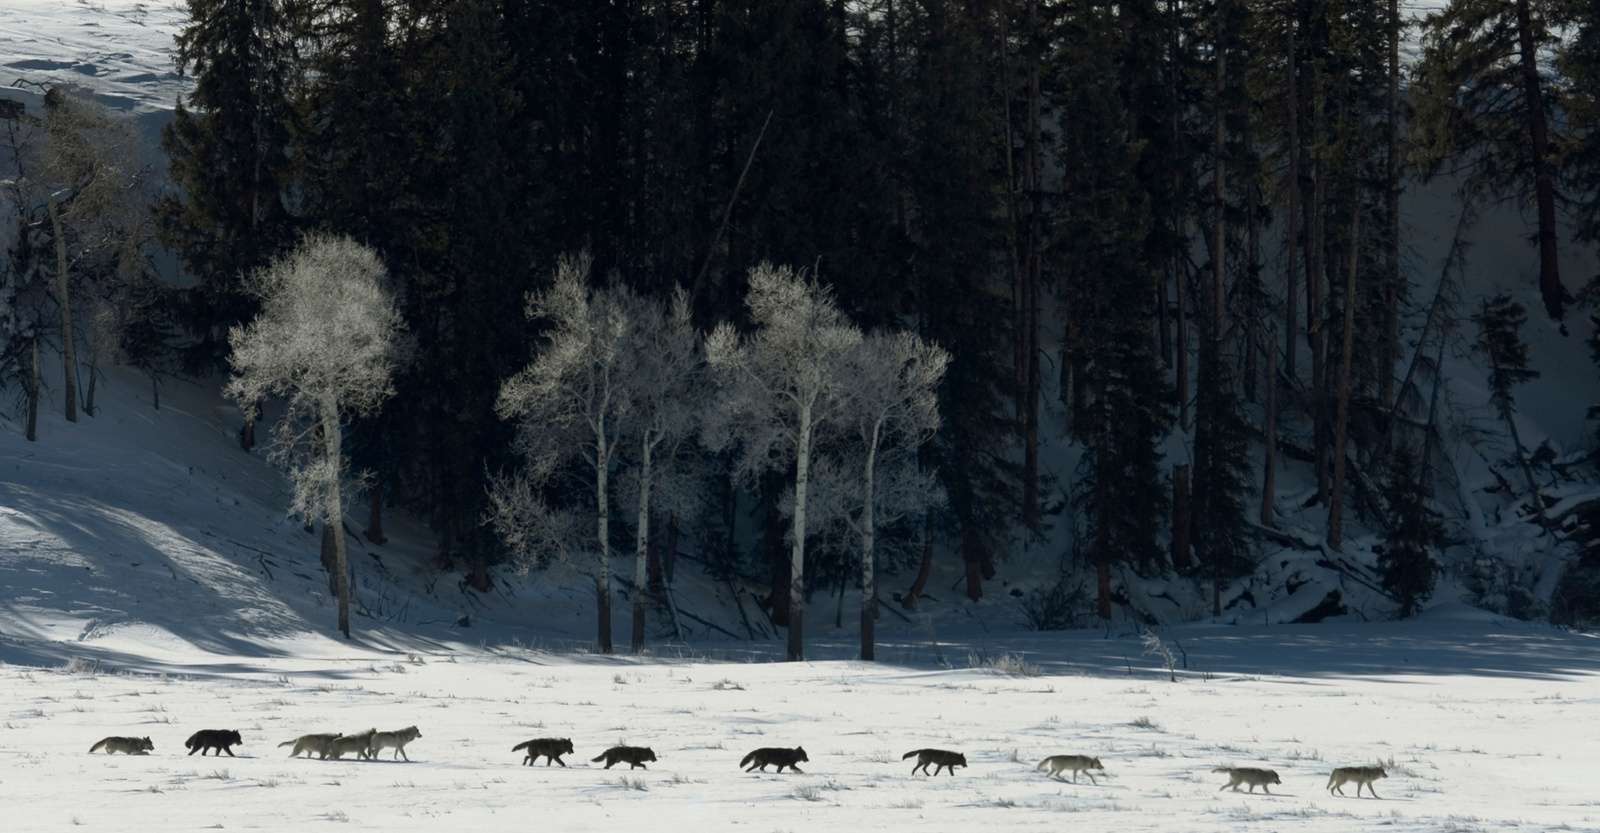 Pack of gray wolves, Lamar Valley, Yellowstone National Park, Wyoming.